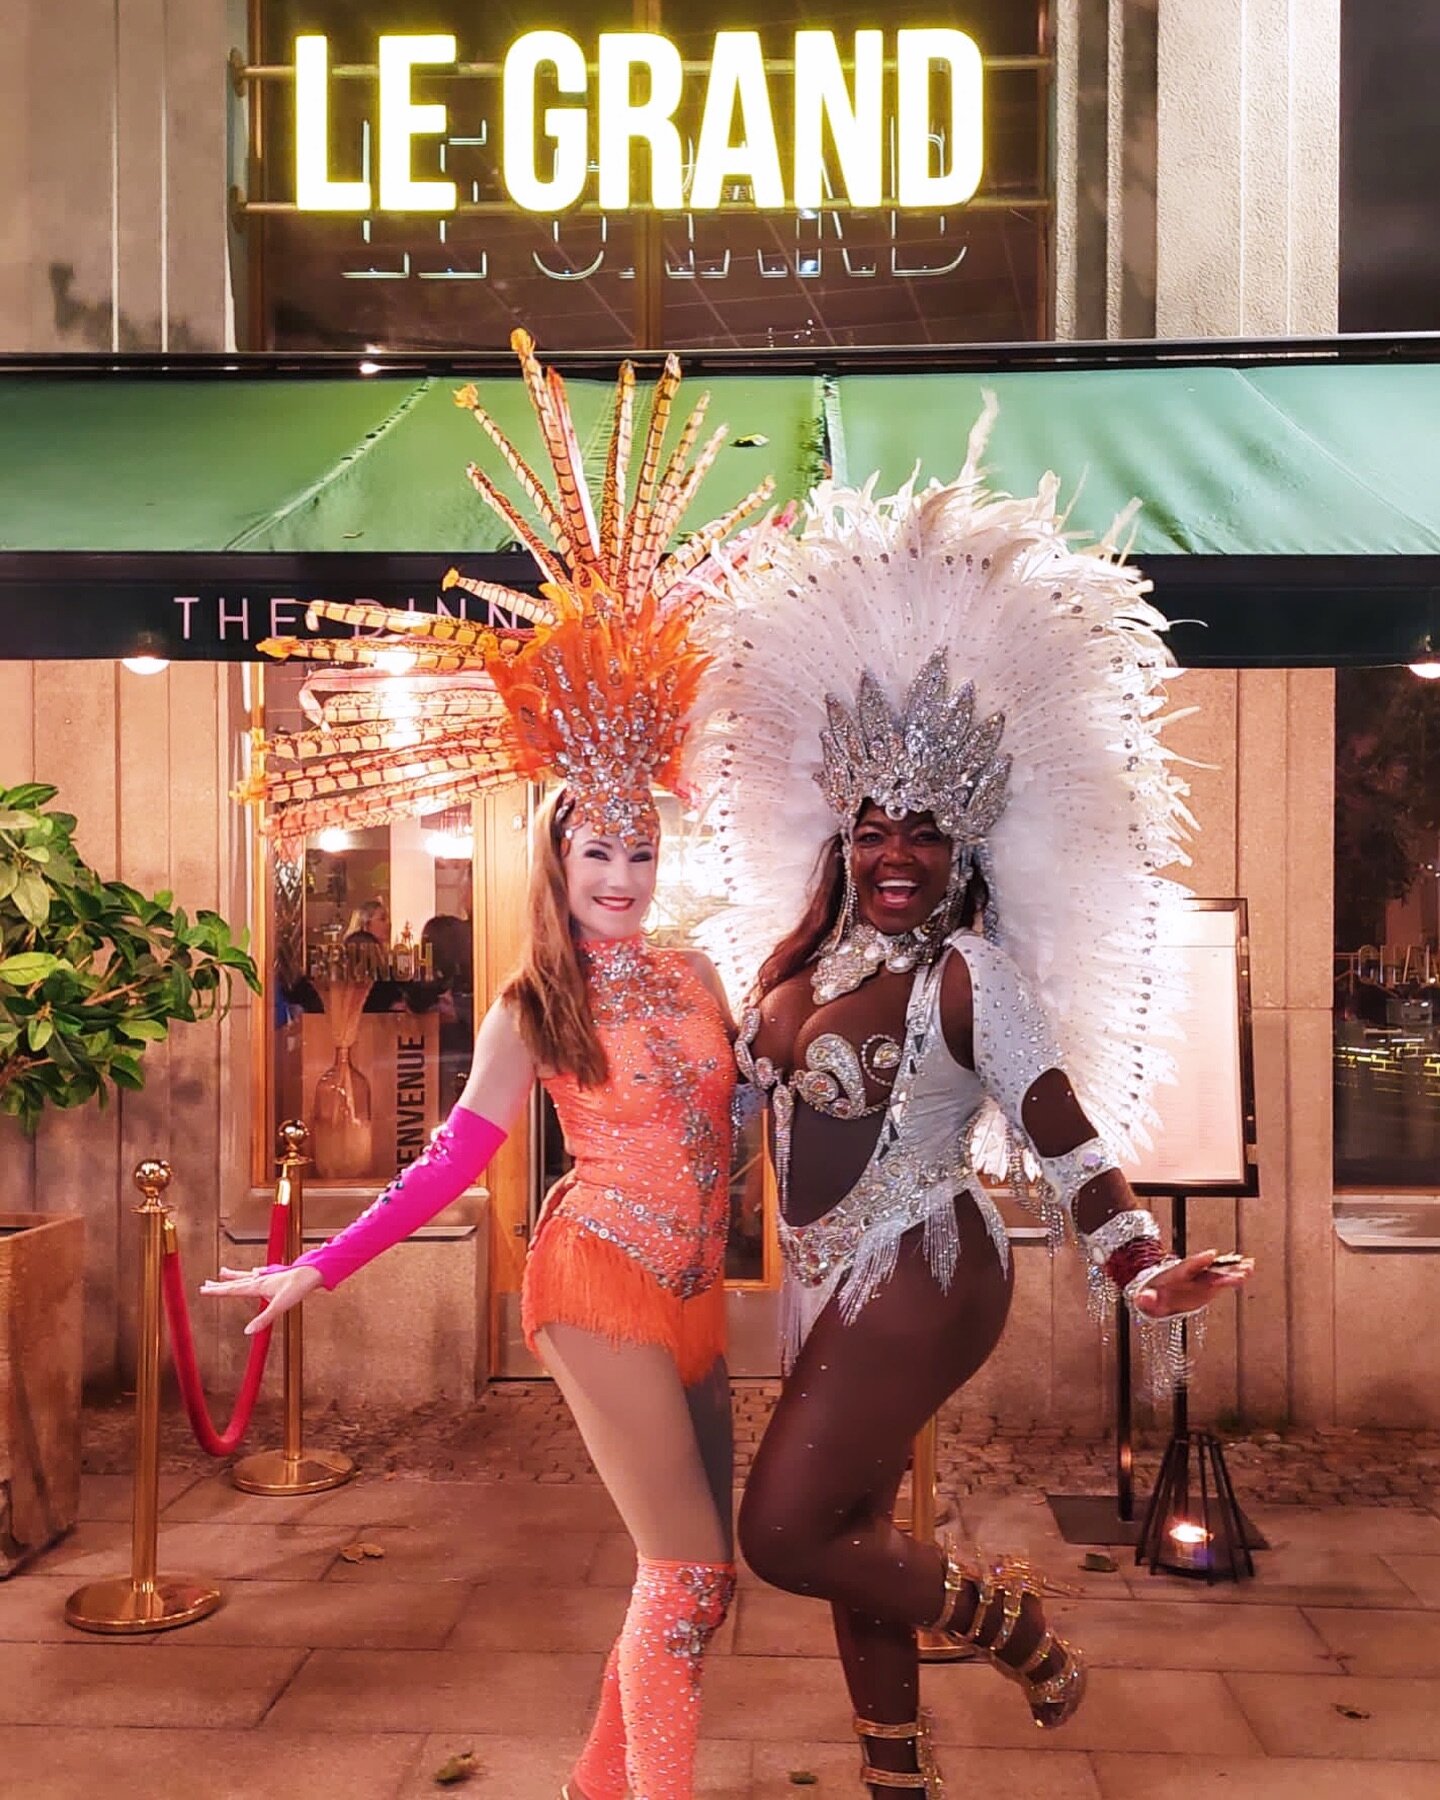 Incase you missed it&hellip;.😝 we are still performing At @cuisinelegrand every Saturday Night (Late seating) So grab your friends and come and have an amazing night with us🥳🫶🏻

#sambadansare #sambadancers #samba #dinnerclub #stockholm #stockholm